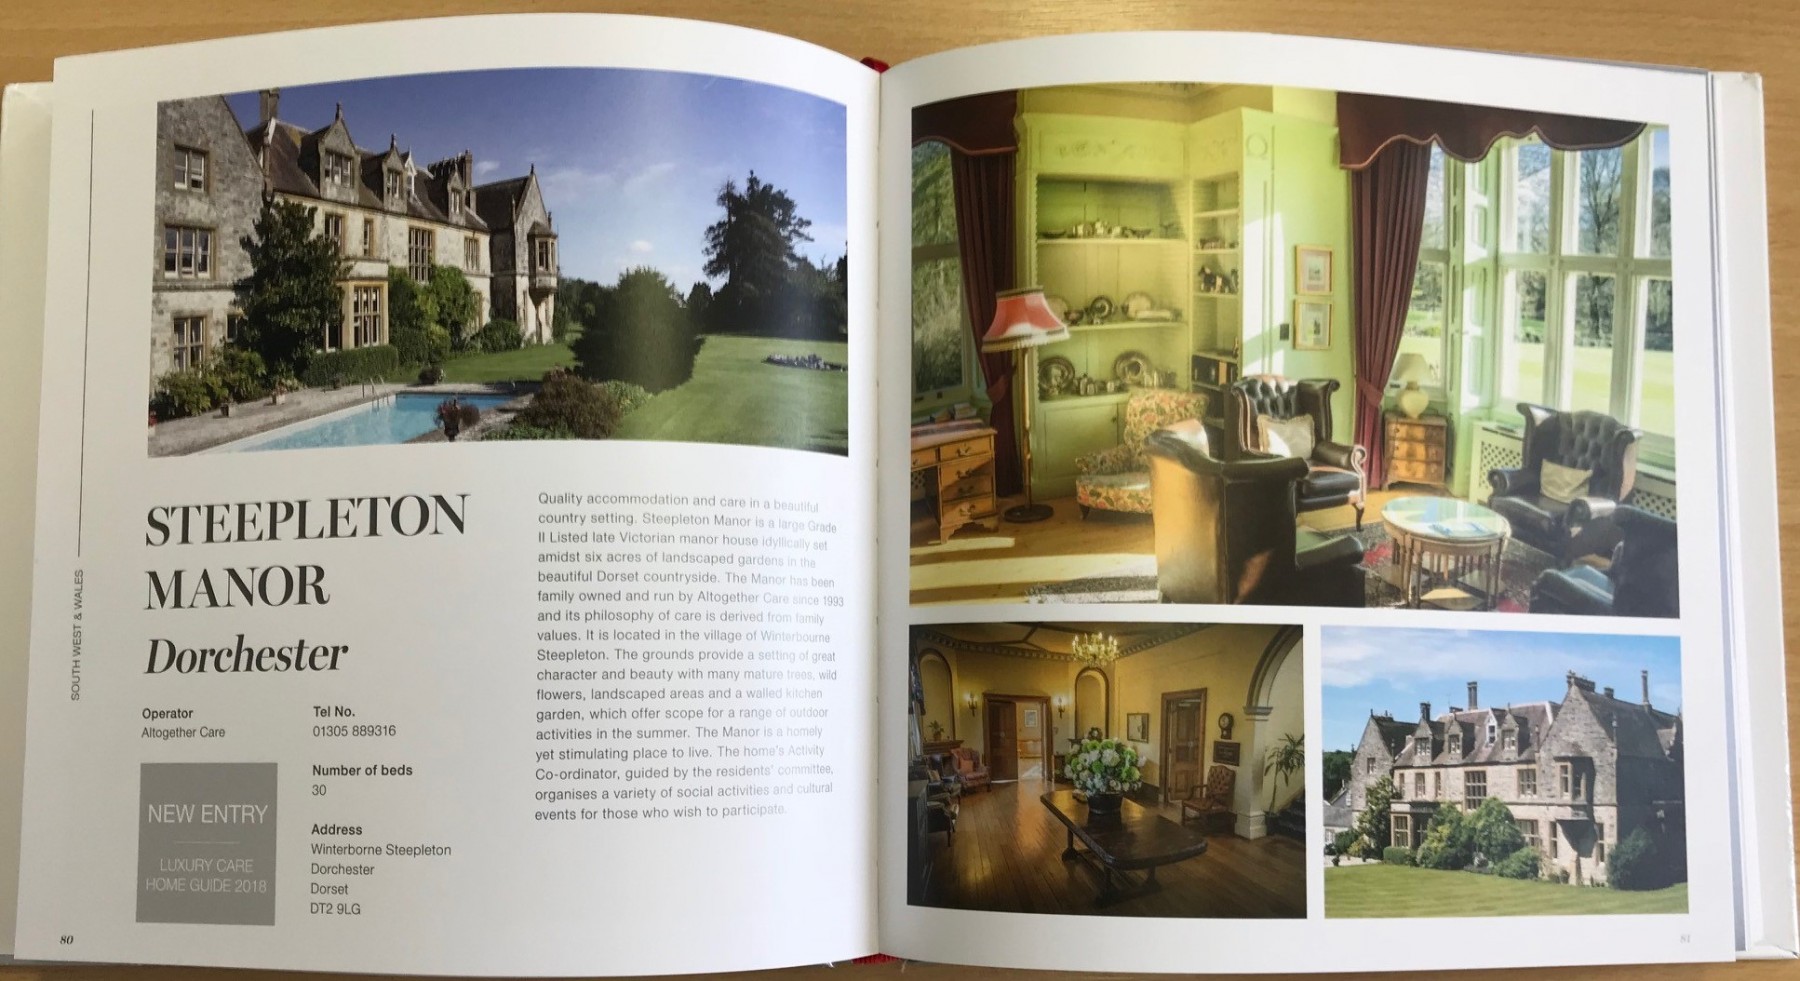 Steepleton Manor featured in Knight Frank’s Luxury Care Home Guide 2018